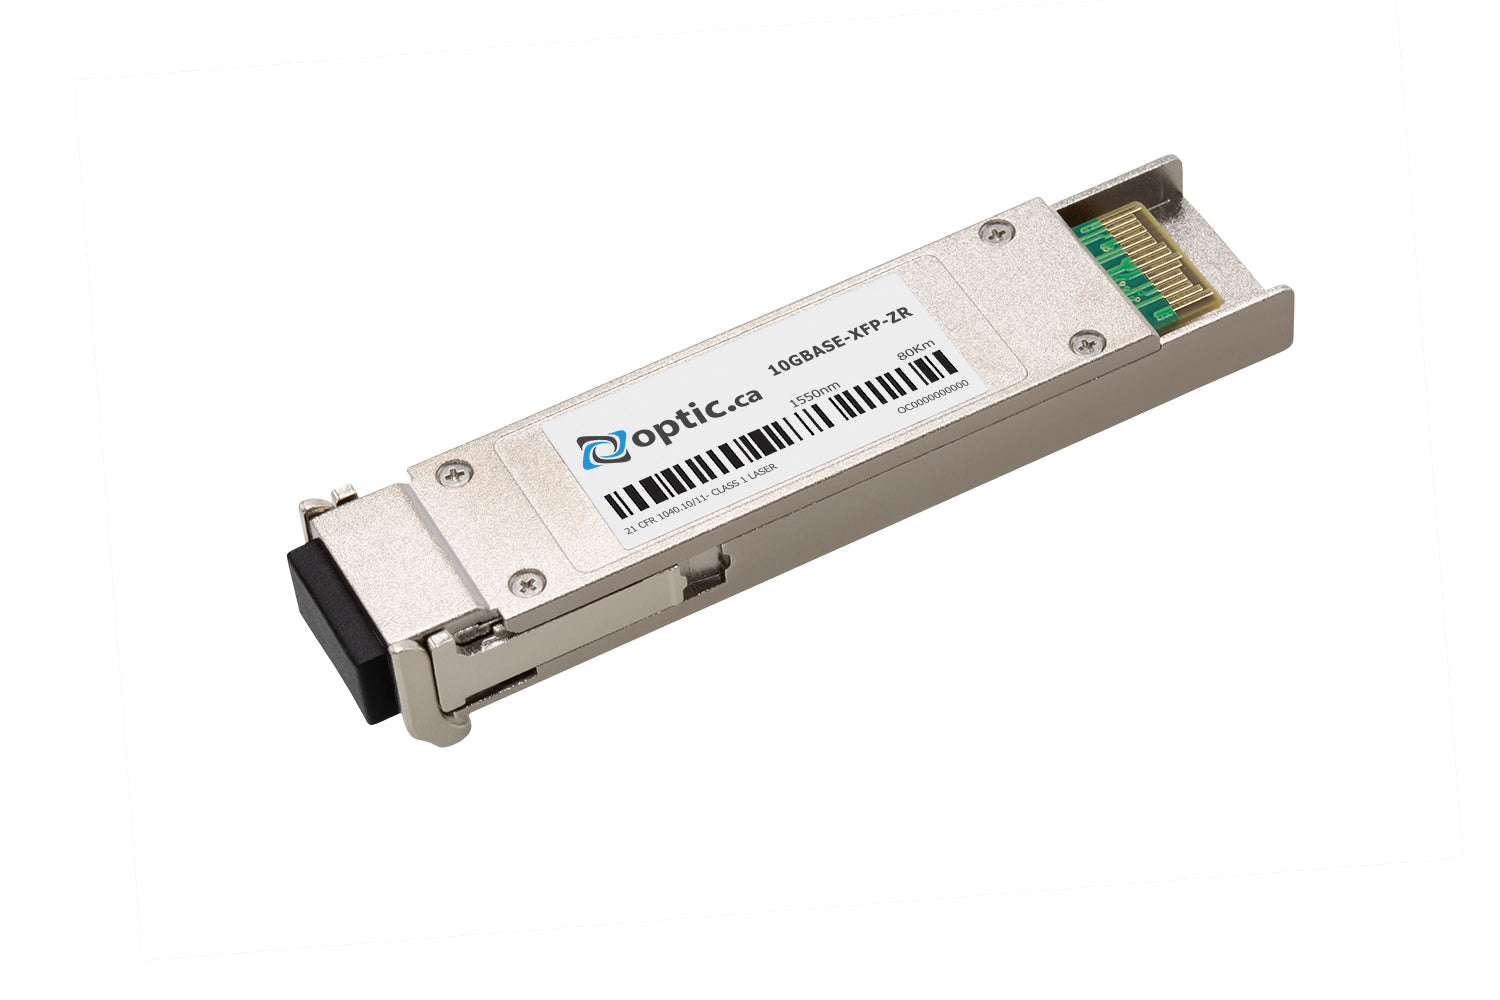 OPTIC.CA - 10GBASE-ZR XFP - XFP-10G-ZR80-OC - ALCATEL-LUCENT COMPATIBLE